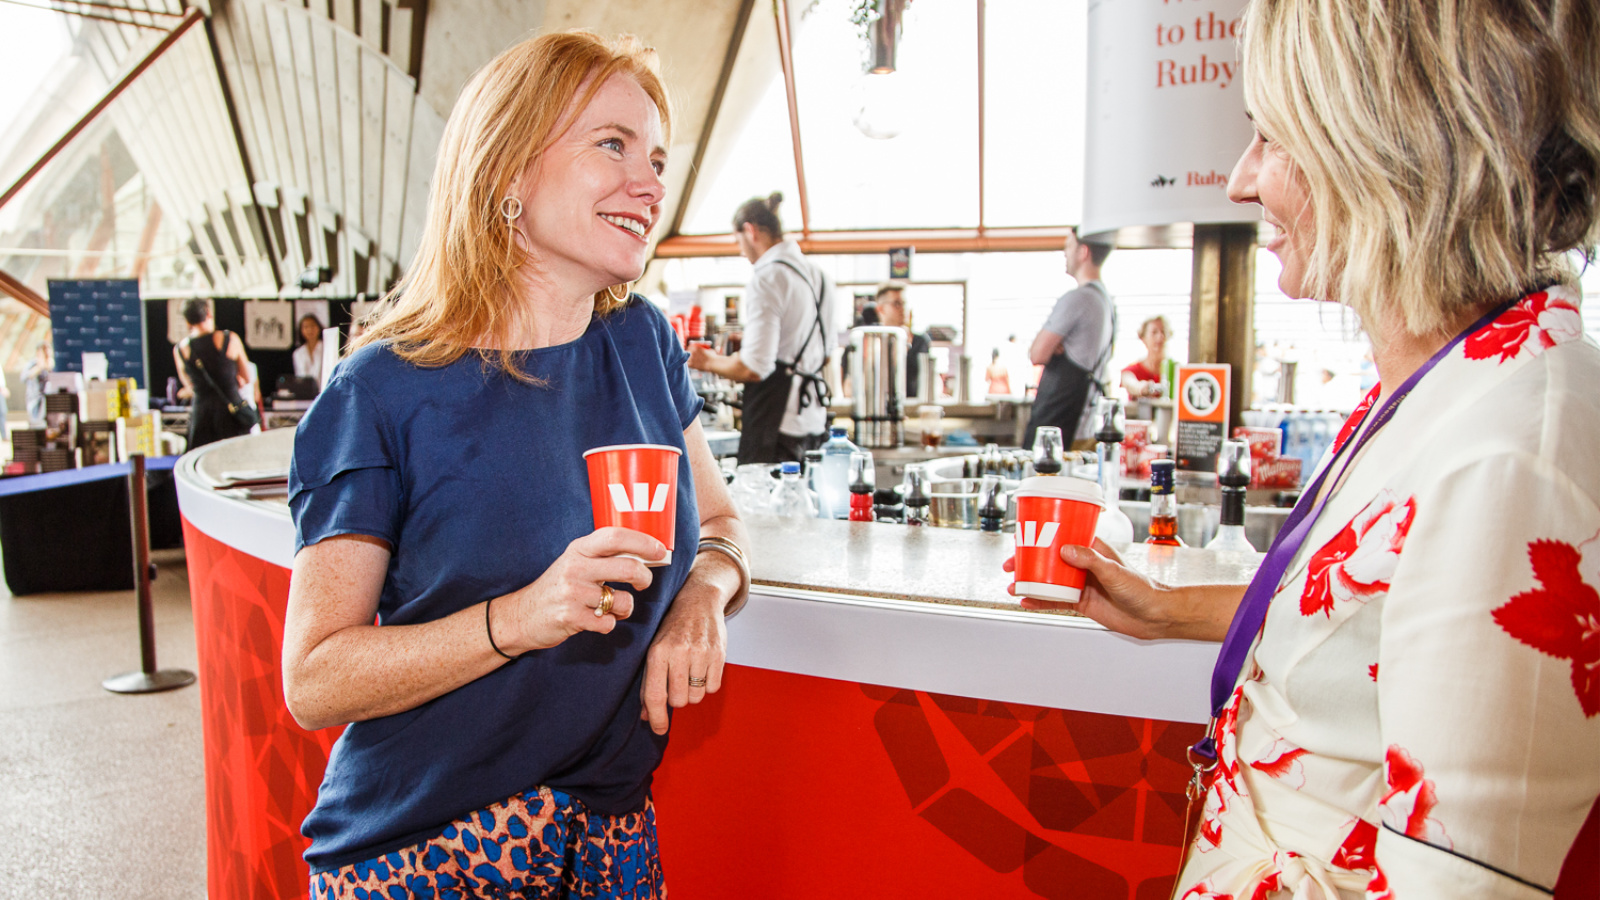 Two women holding coffee cups and talking in front of a bar.